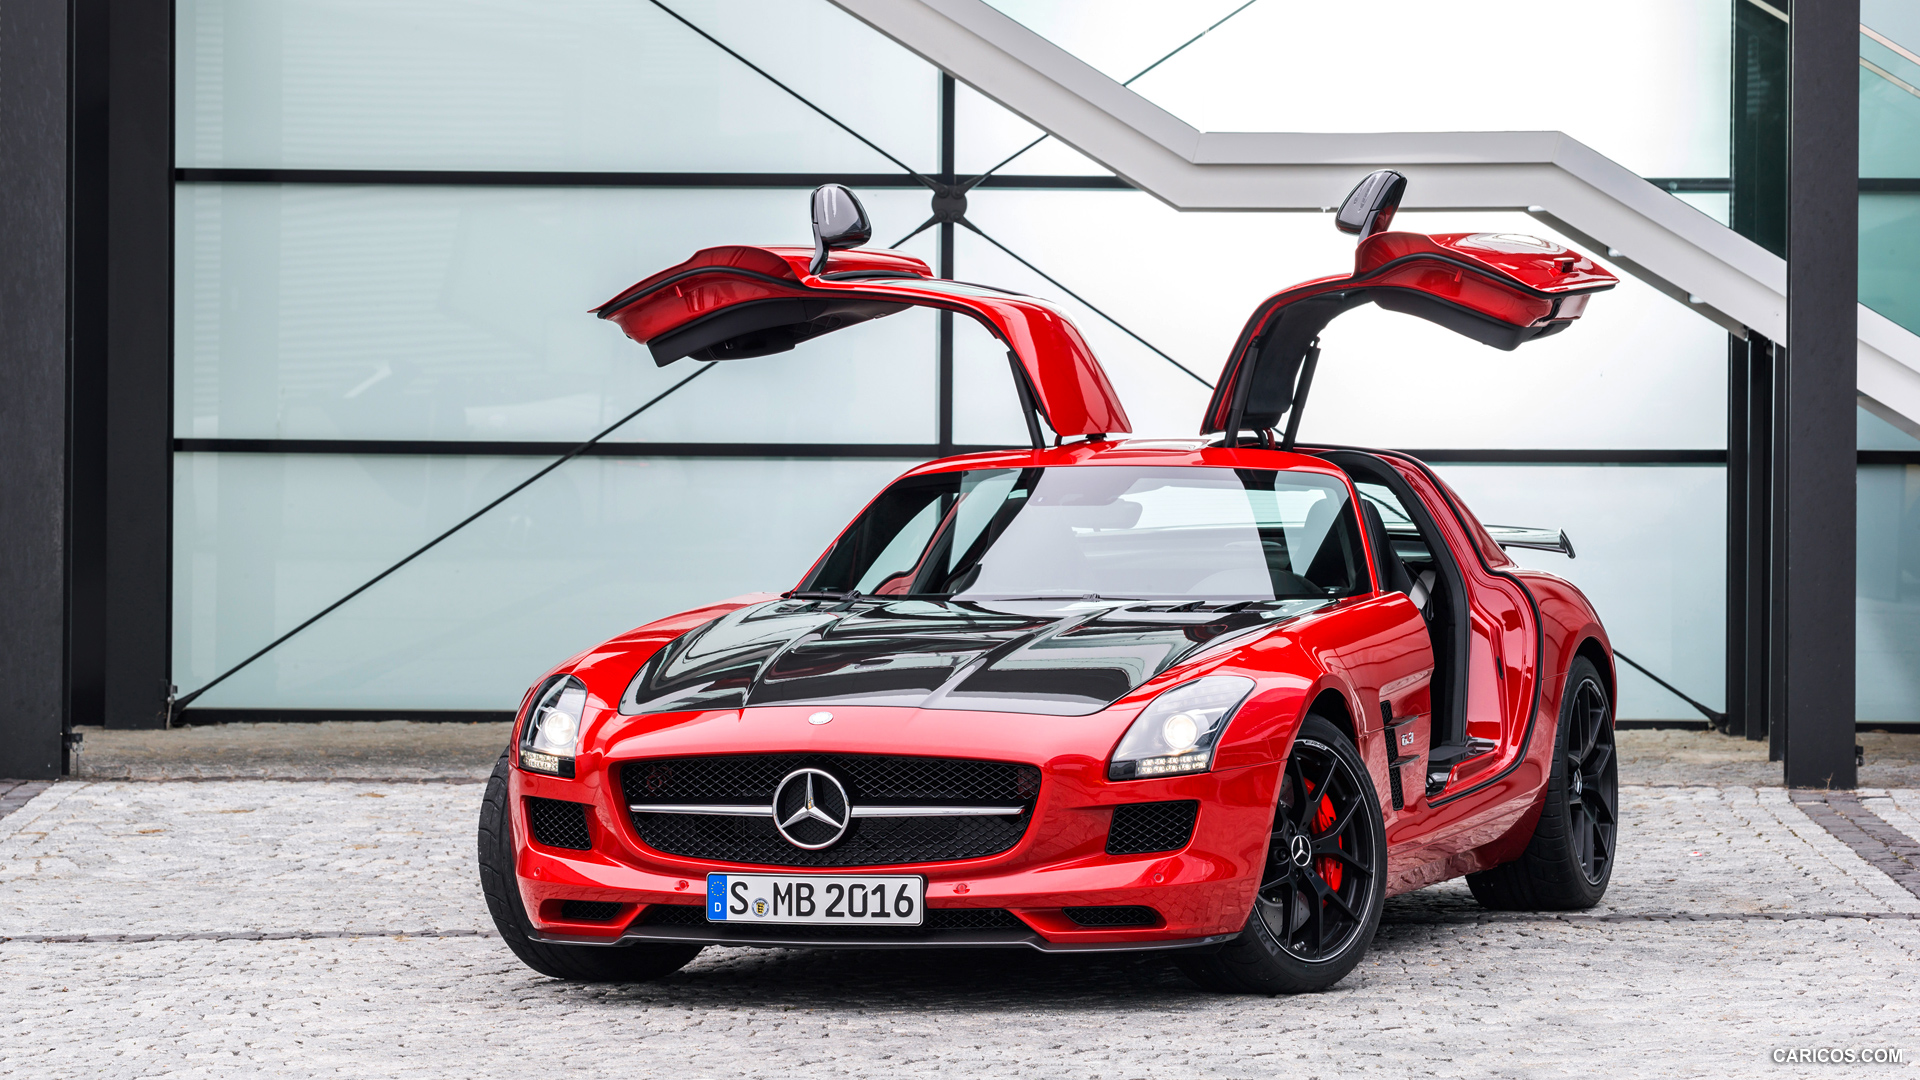  2015 Mercedes-Benz SLS AMG GT Coupe Final Edition - Front, #6 of 41